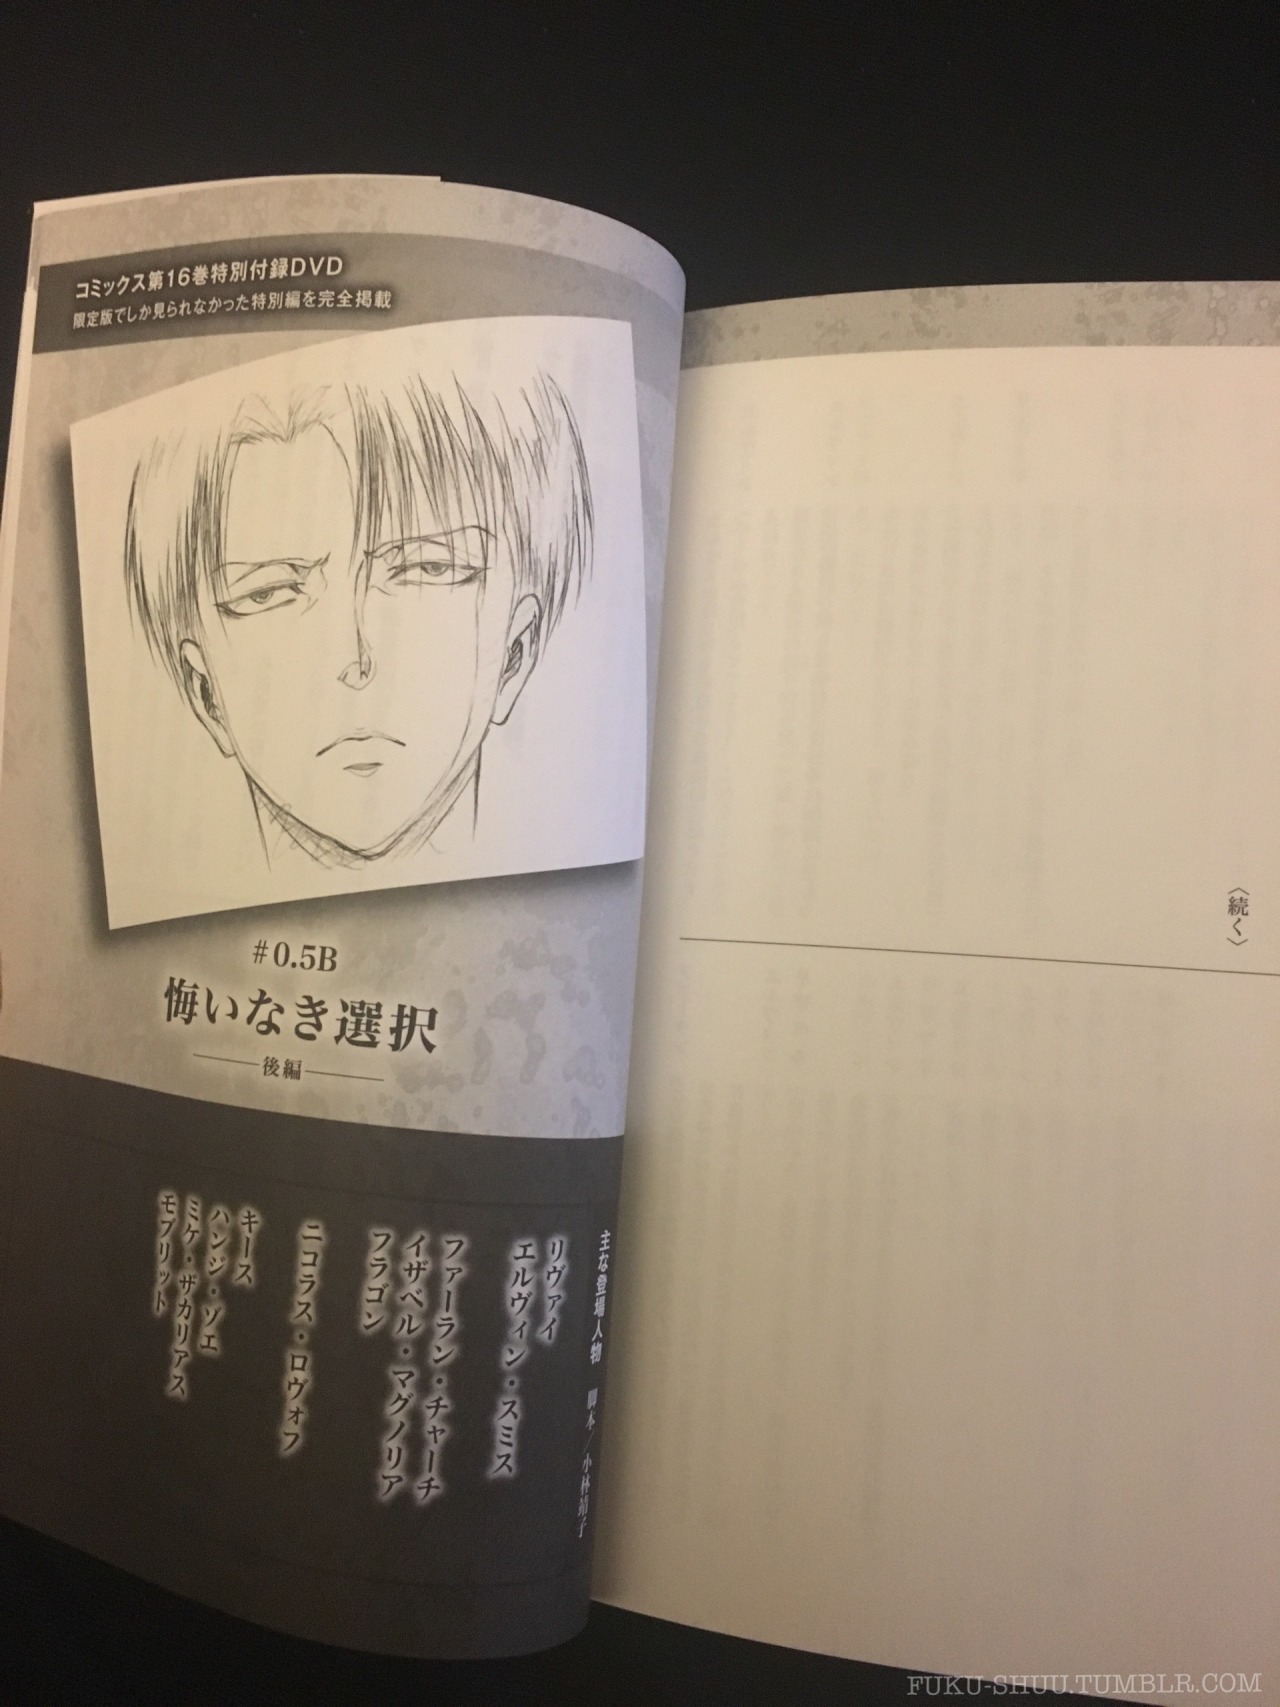 Title pages for the scripts of the A Choice with No Regrets OVAs, featuring Levi!